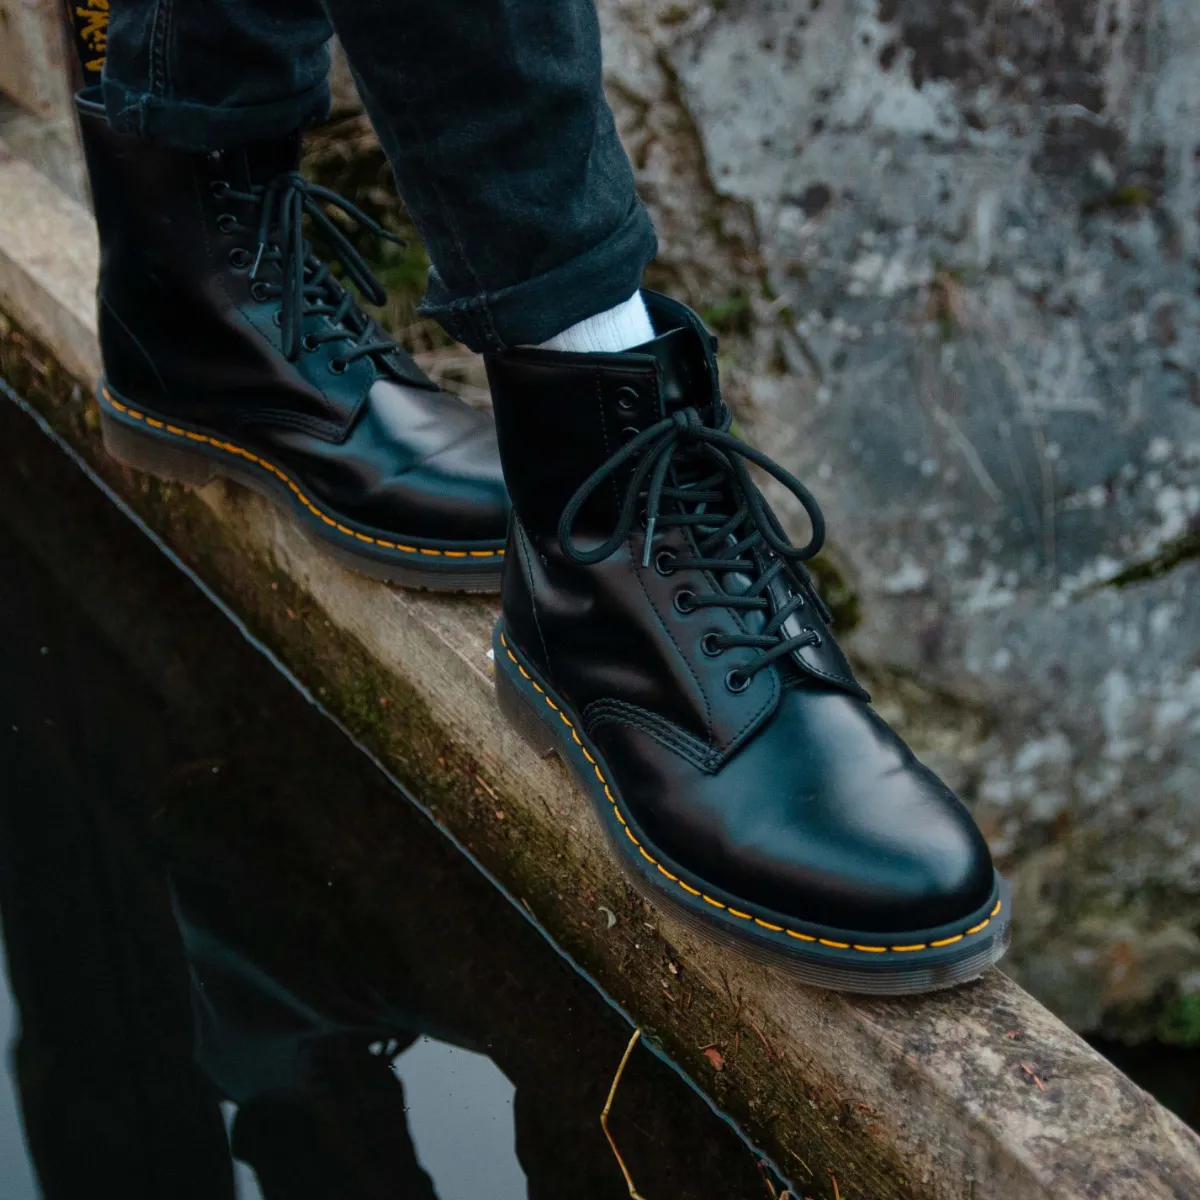 Find out what to wear with Dr Martens. Black Dr Martens boots.